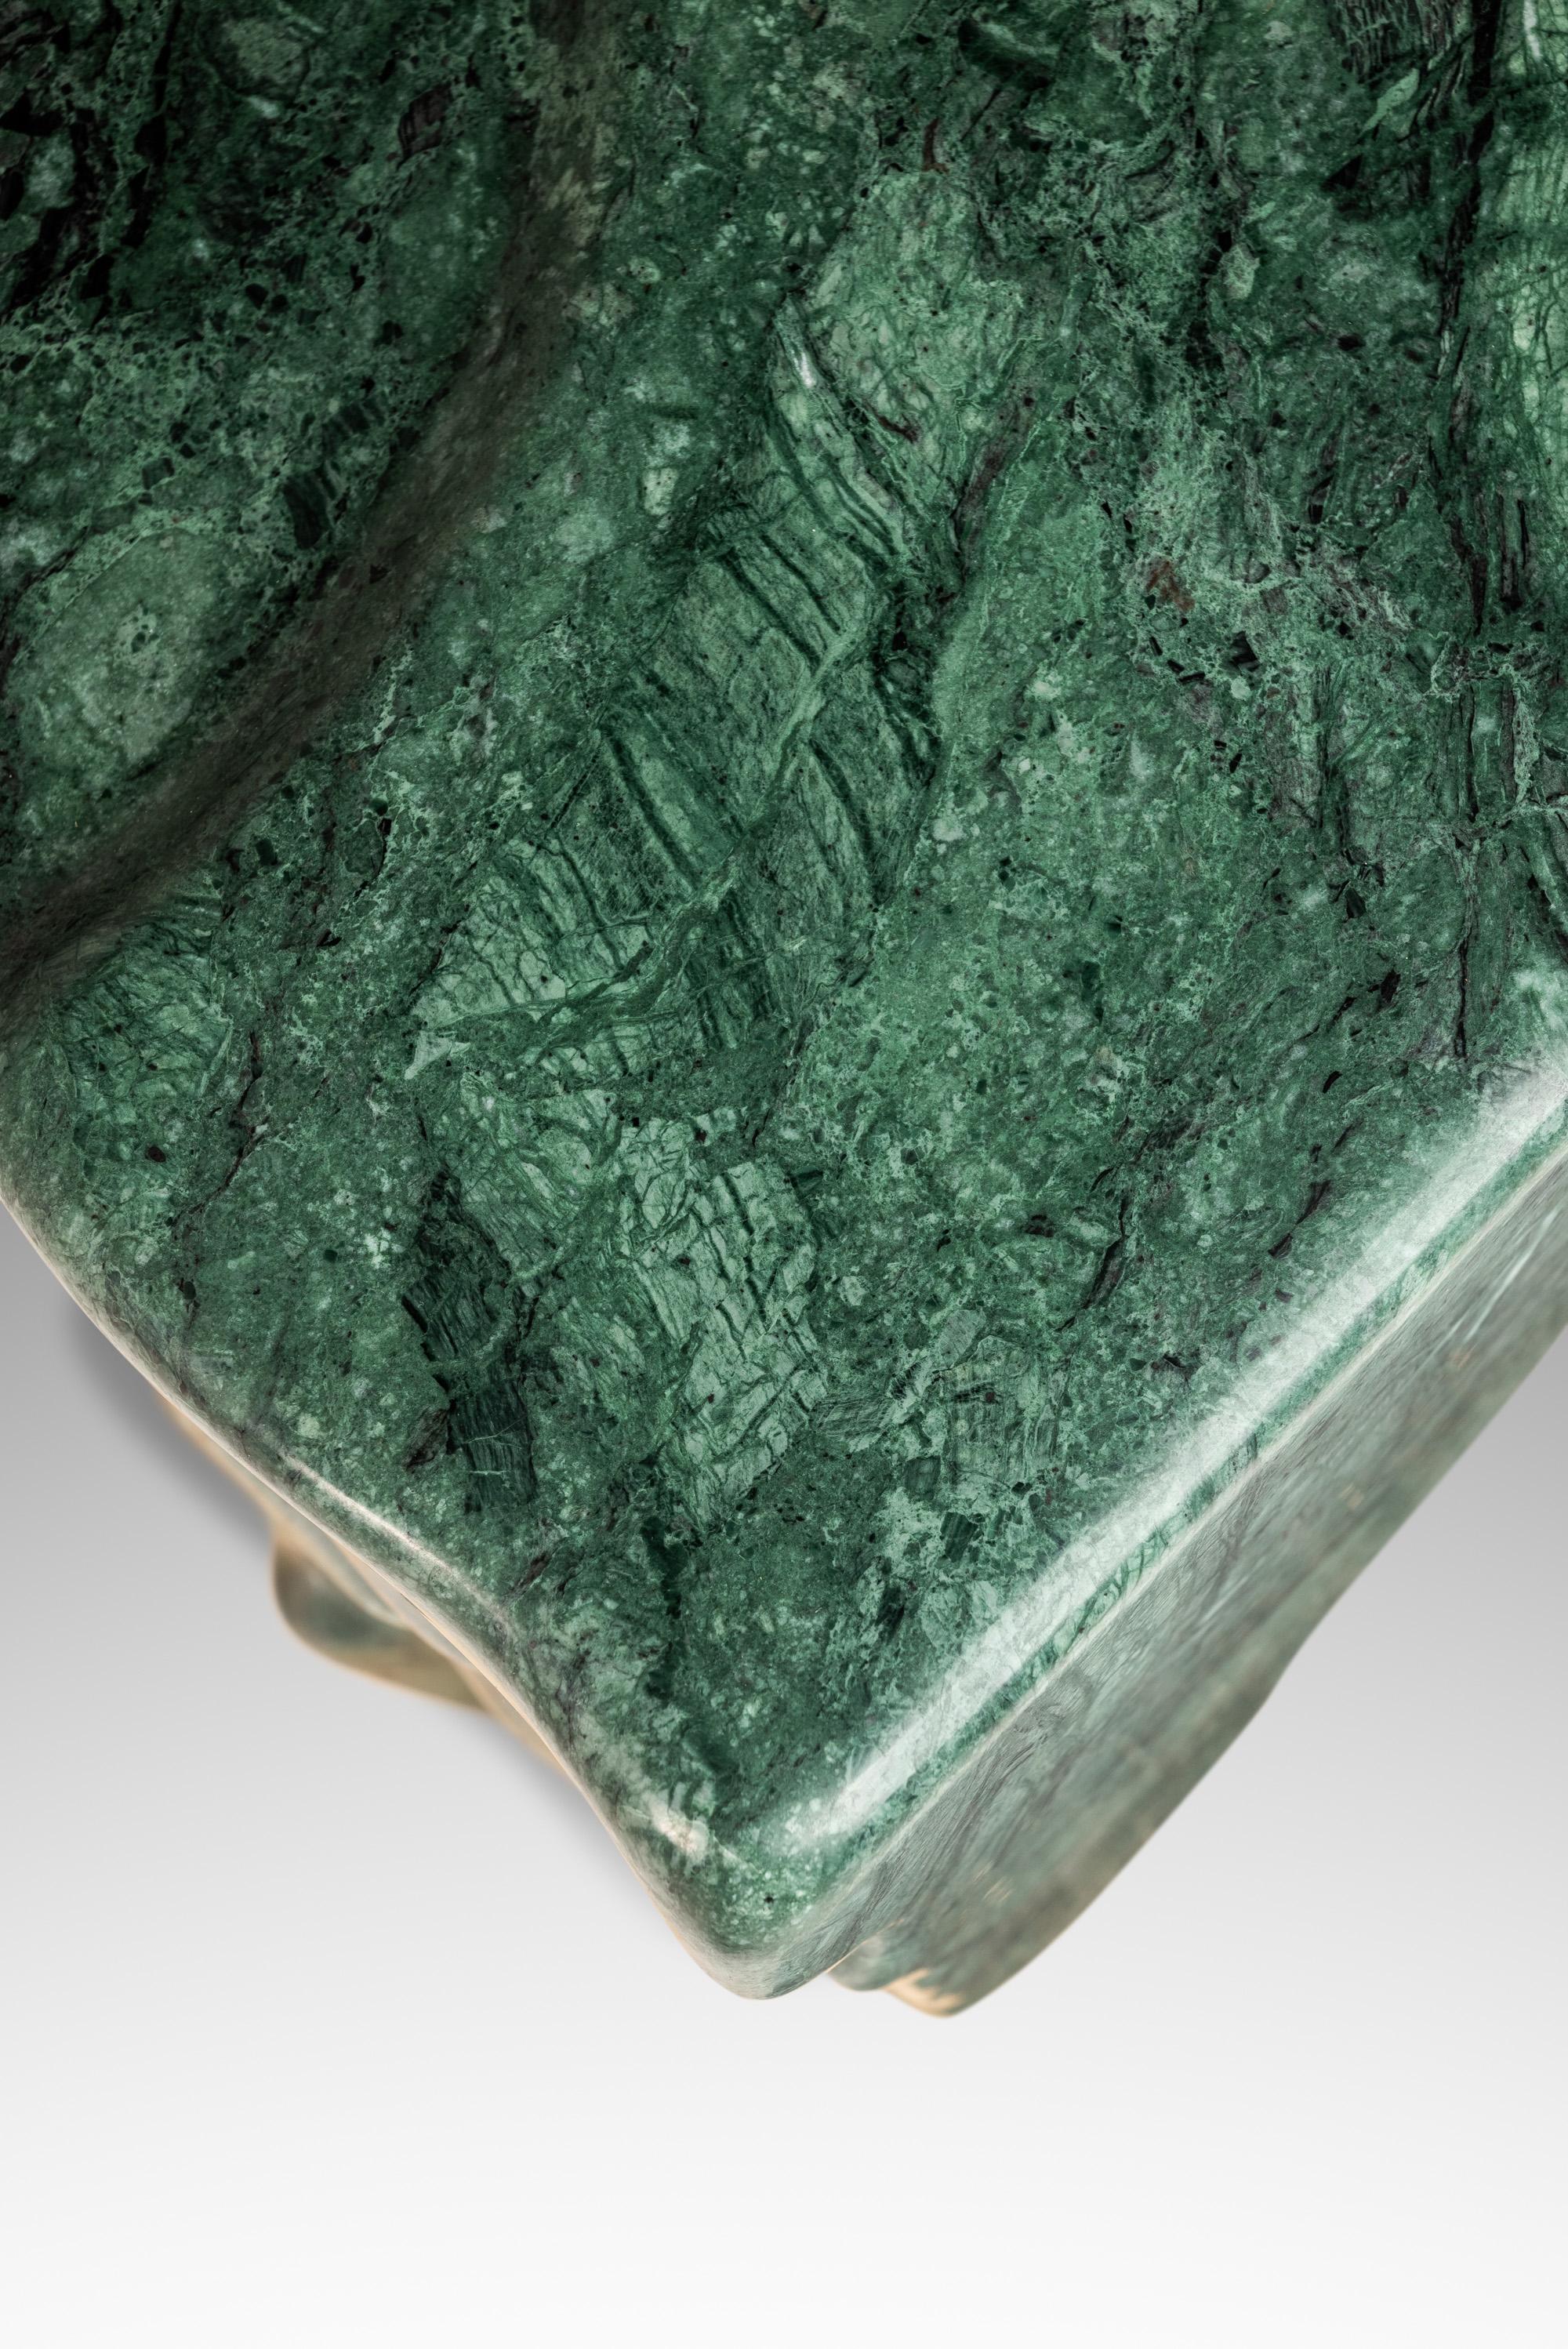 Green Marble Abstract Organic Modern Sculpture by Mark Leblanc, USA, 2000's For Sale 10